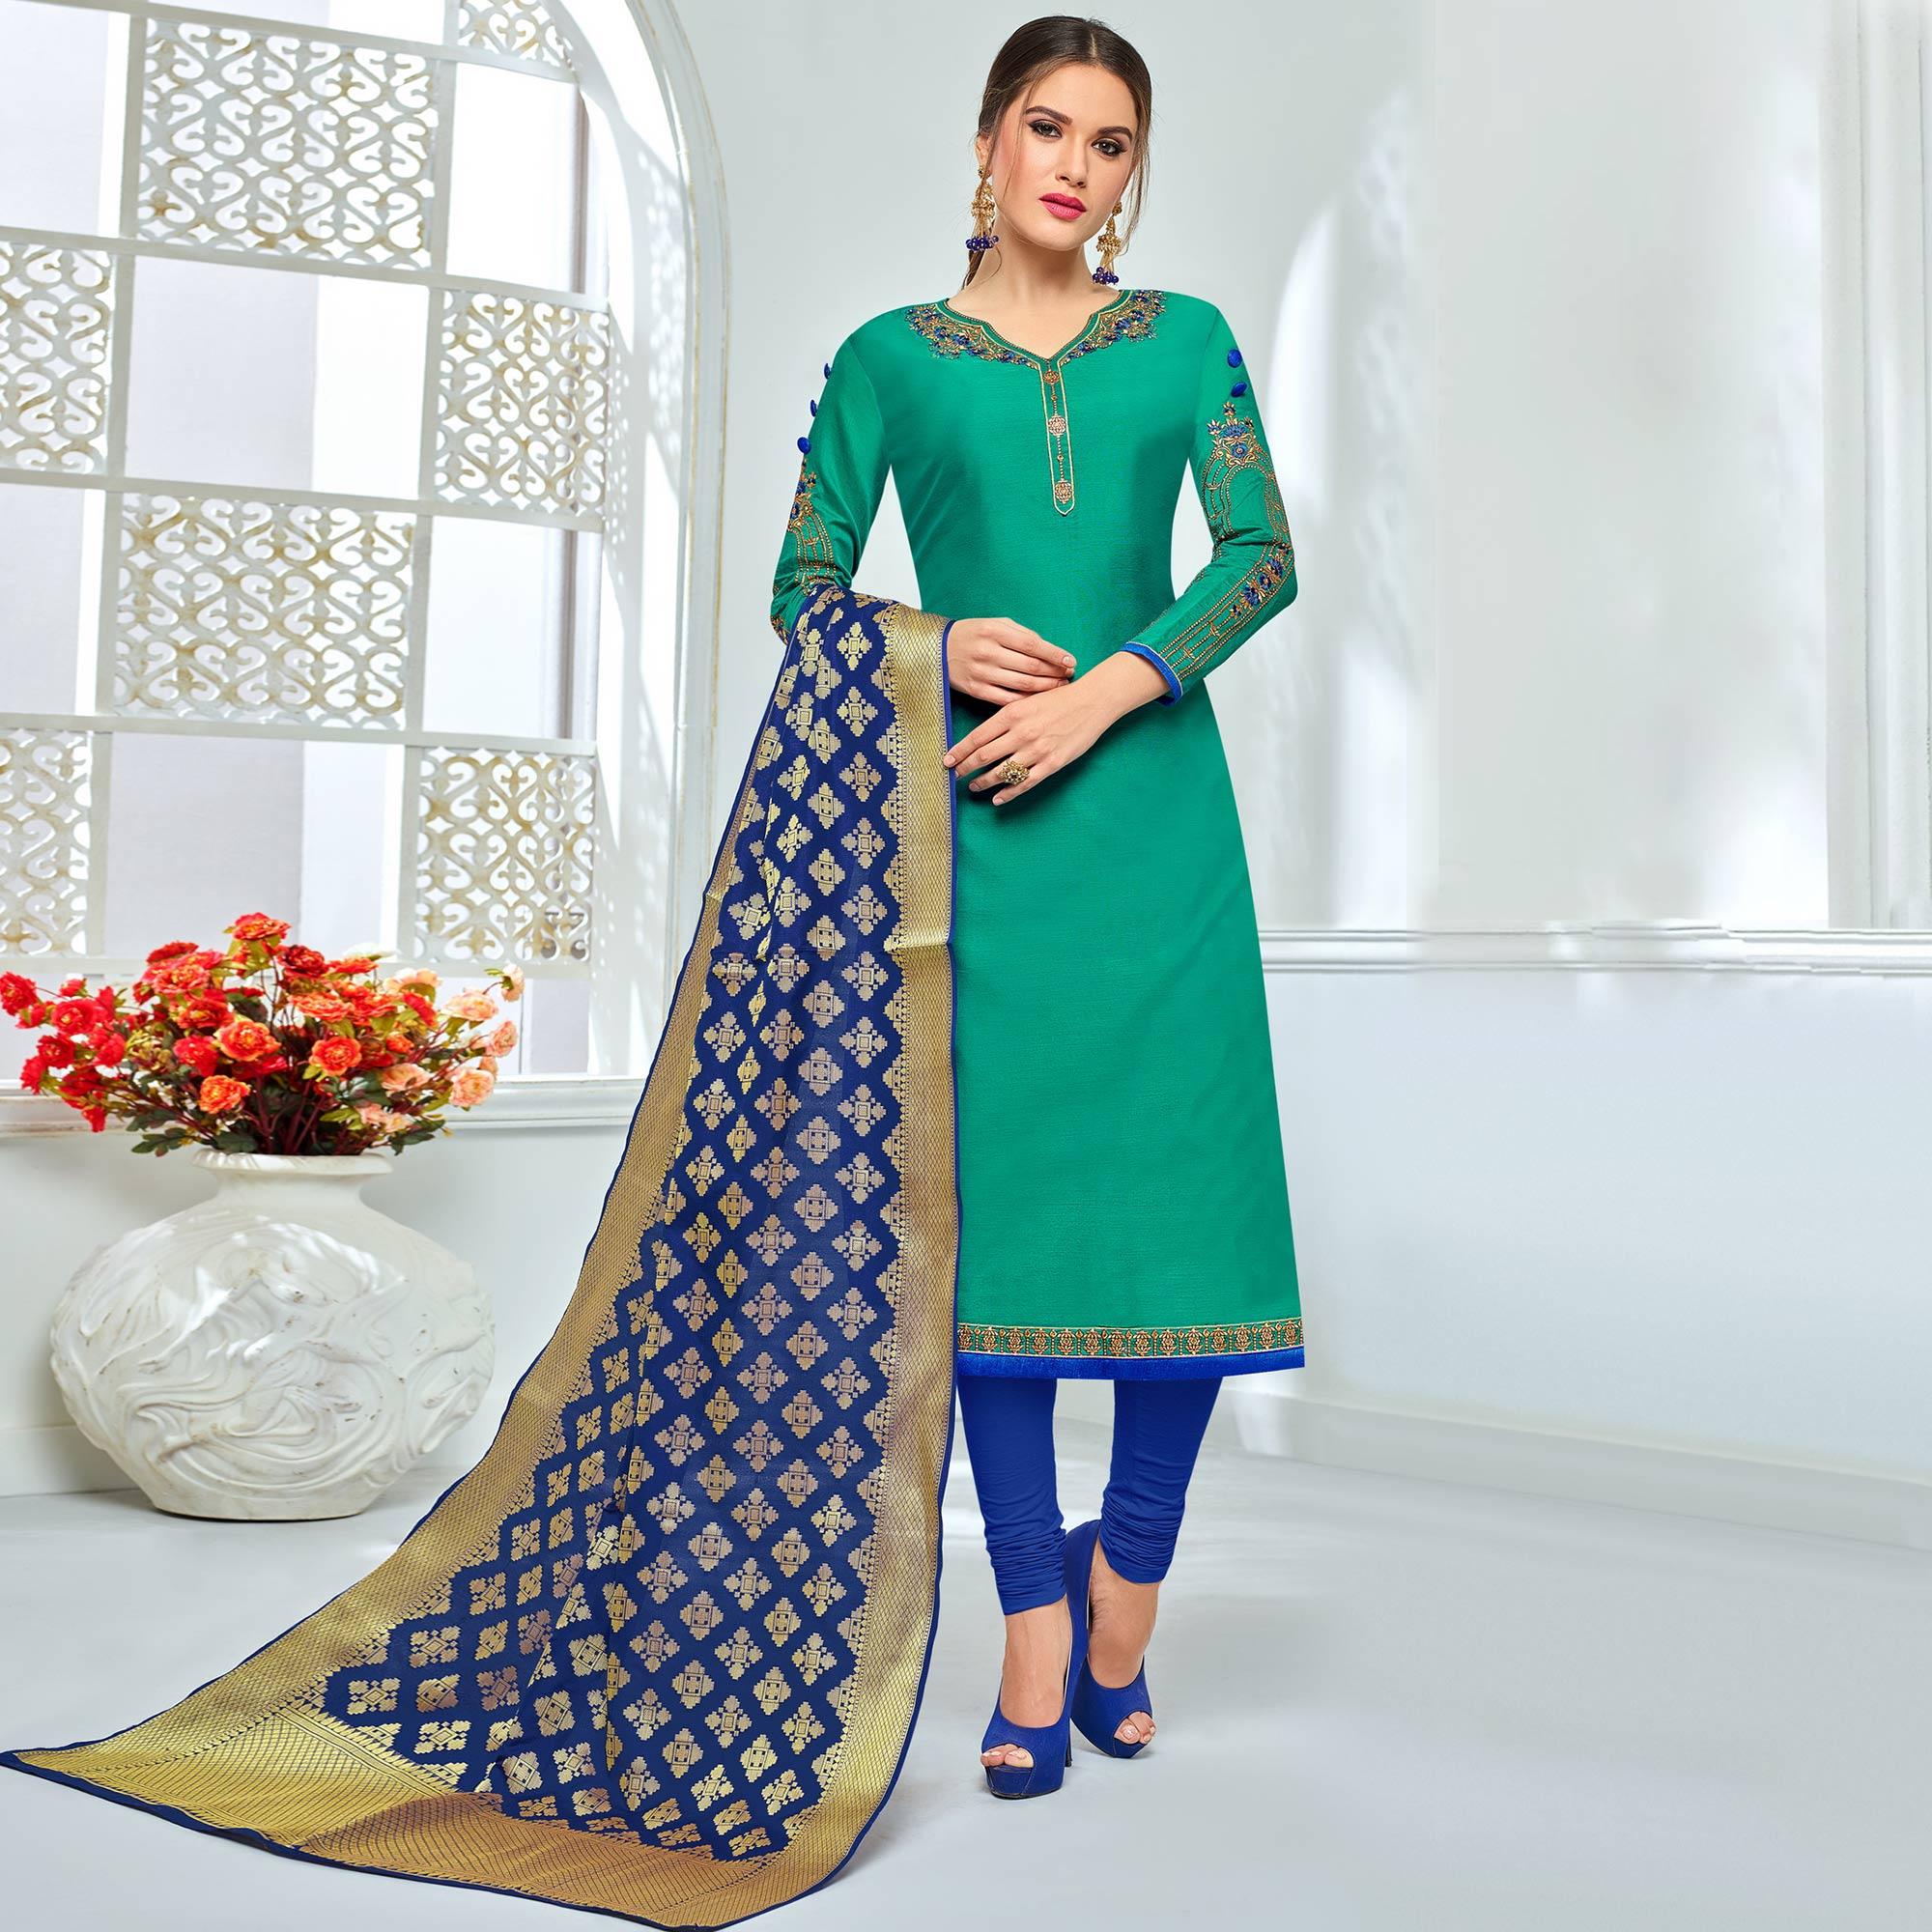 Lovely Teal Green Colored Party Wear Embroidered Chanderi Suit - Peachmode